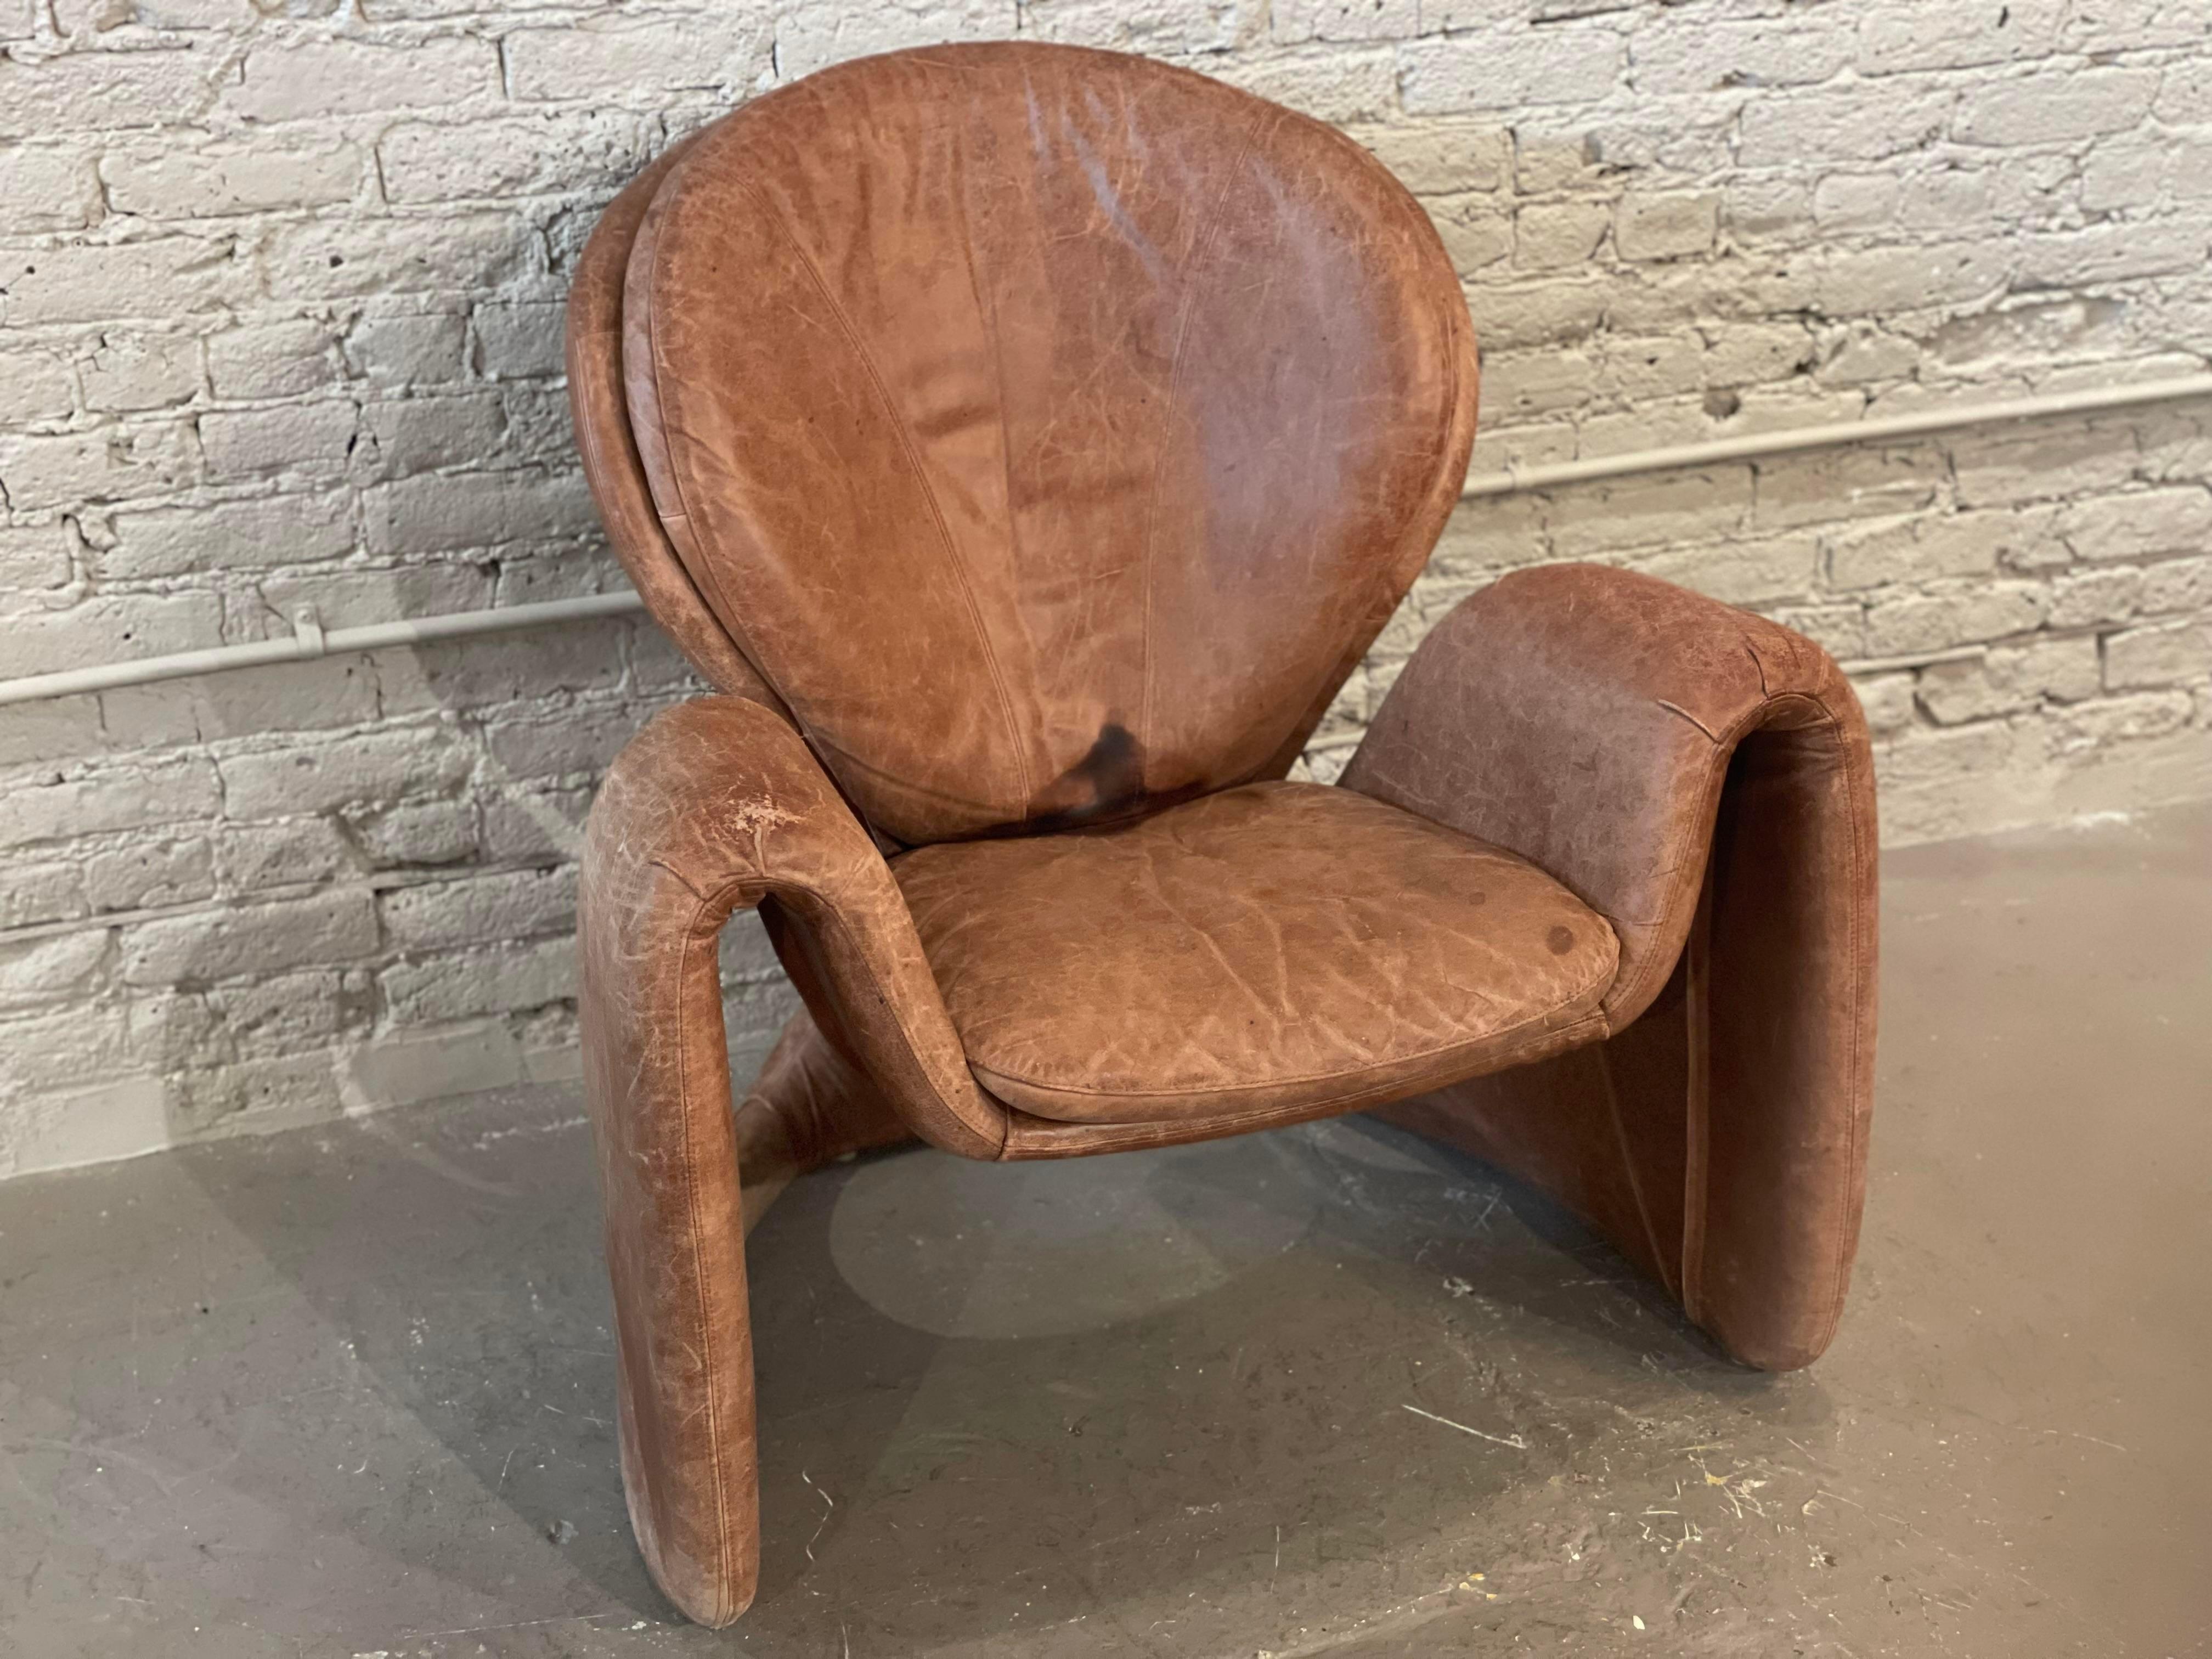 Post-Modern 1980s Sculptural Postmodern Distressed Leather Chair